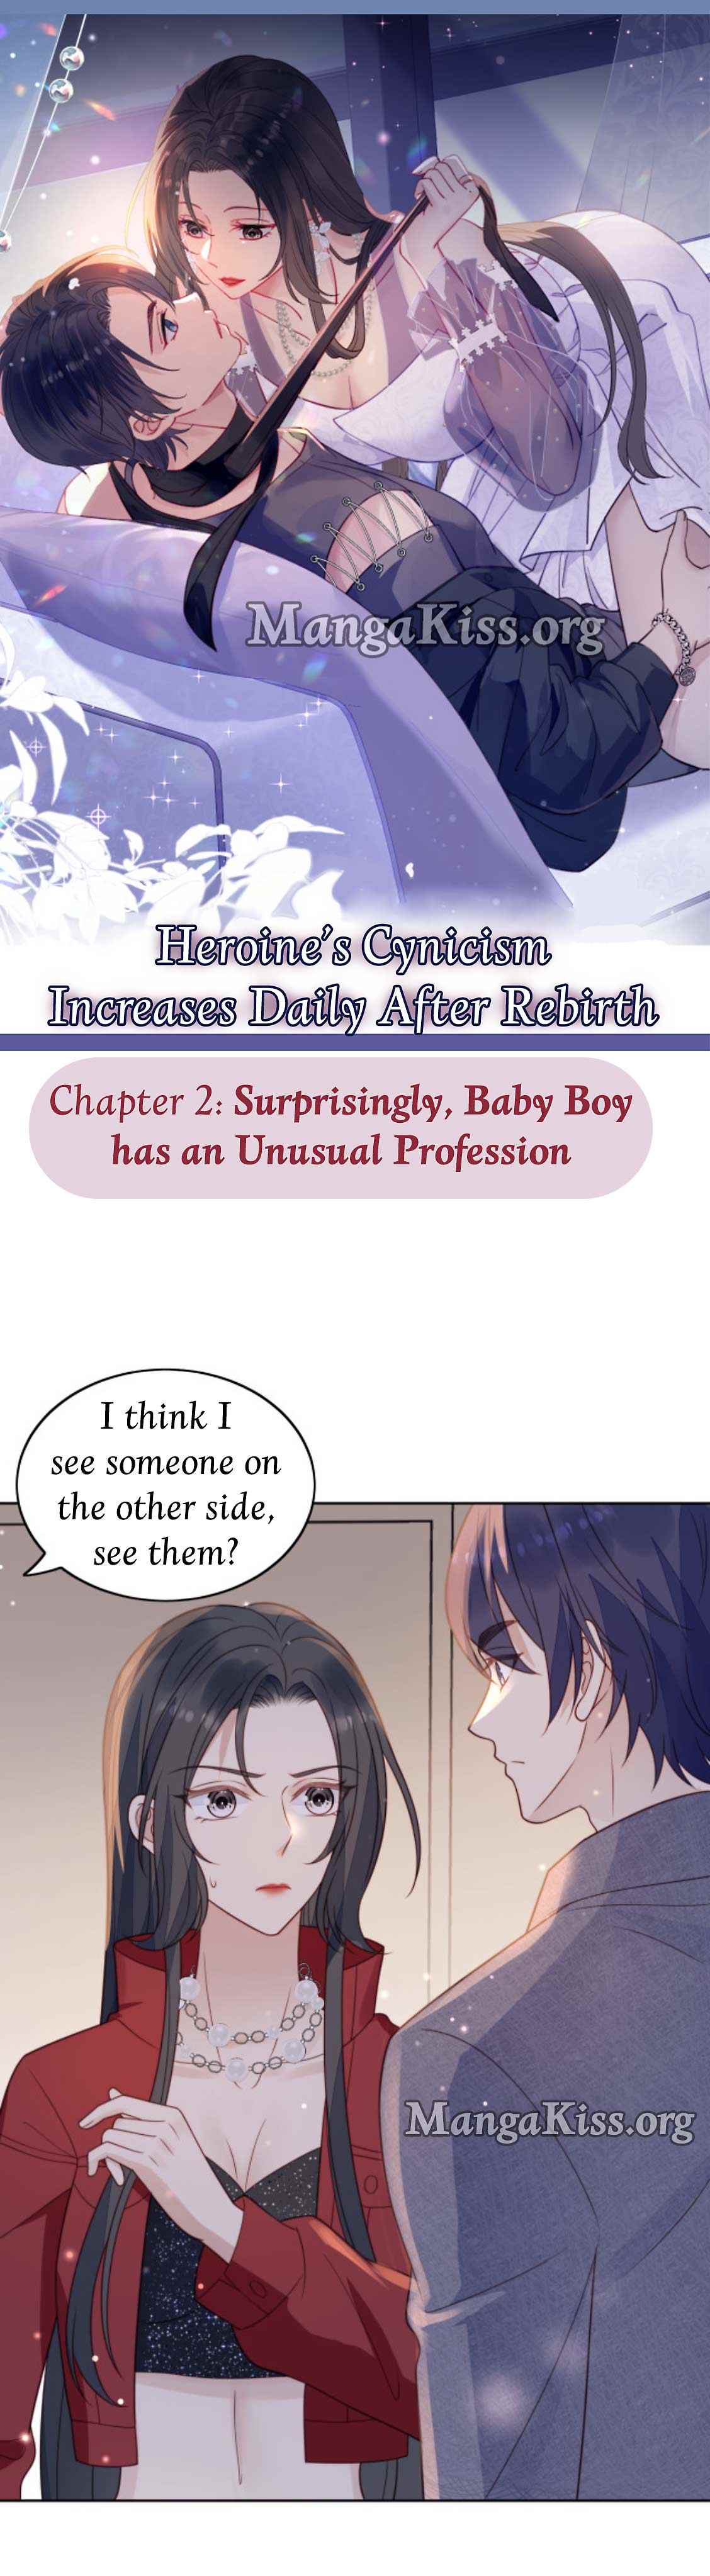 Heroine’S Cynicism Increases Daily After Rebirth - Page 1